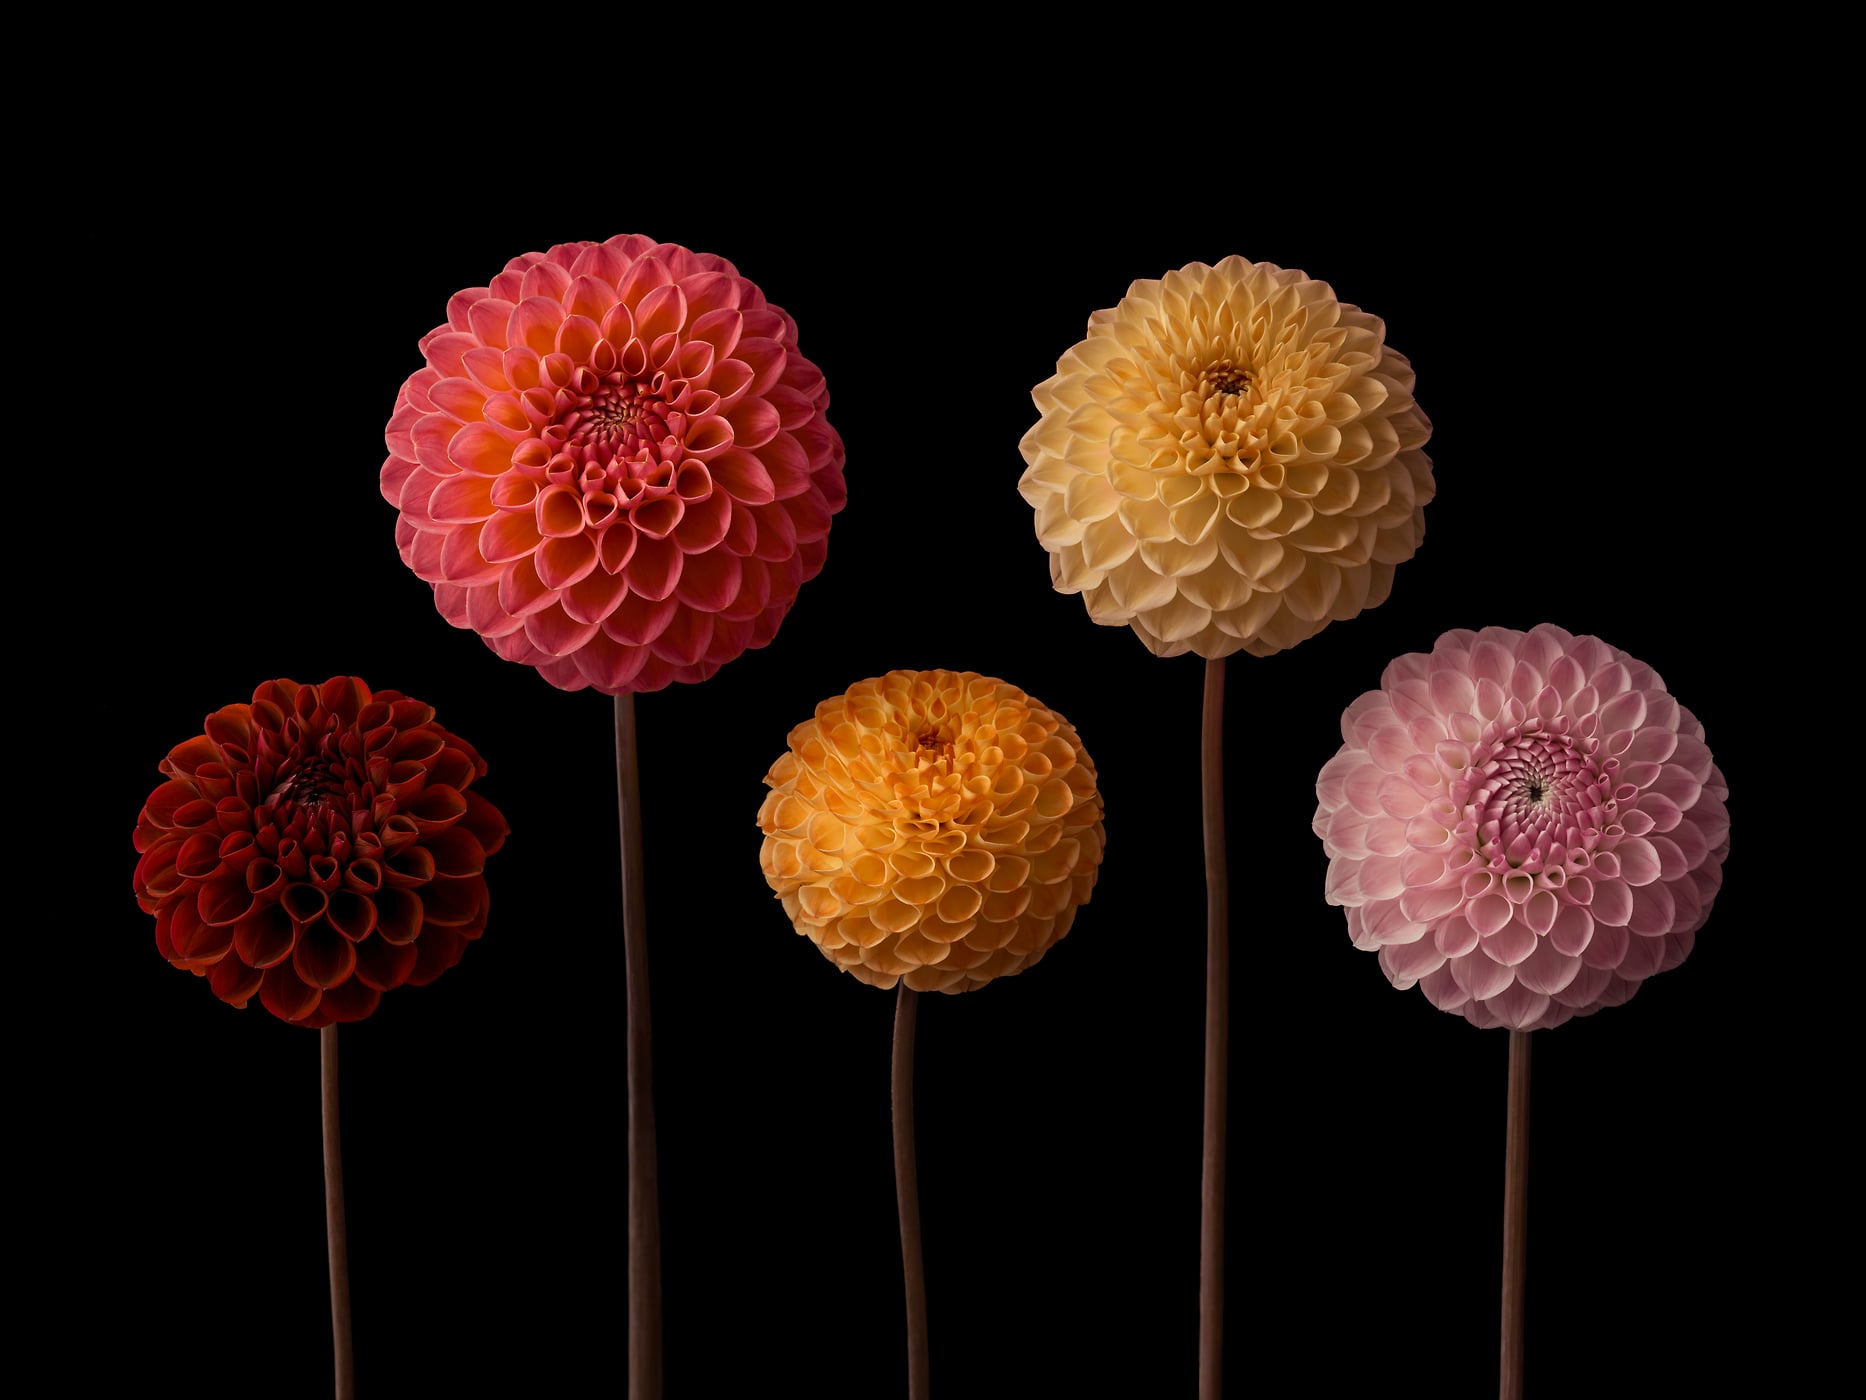 407 megapixels! A very high resolution, large-format VAST photo print of pompon flowers on a dark background; still life photograph created by Assaf Frank.